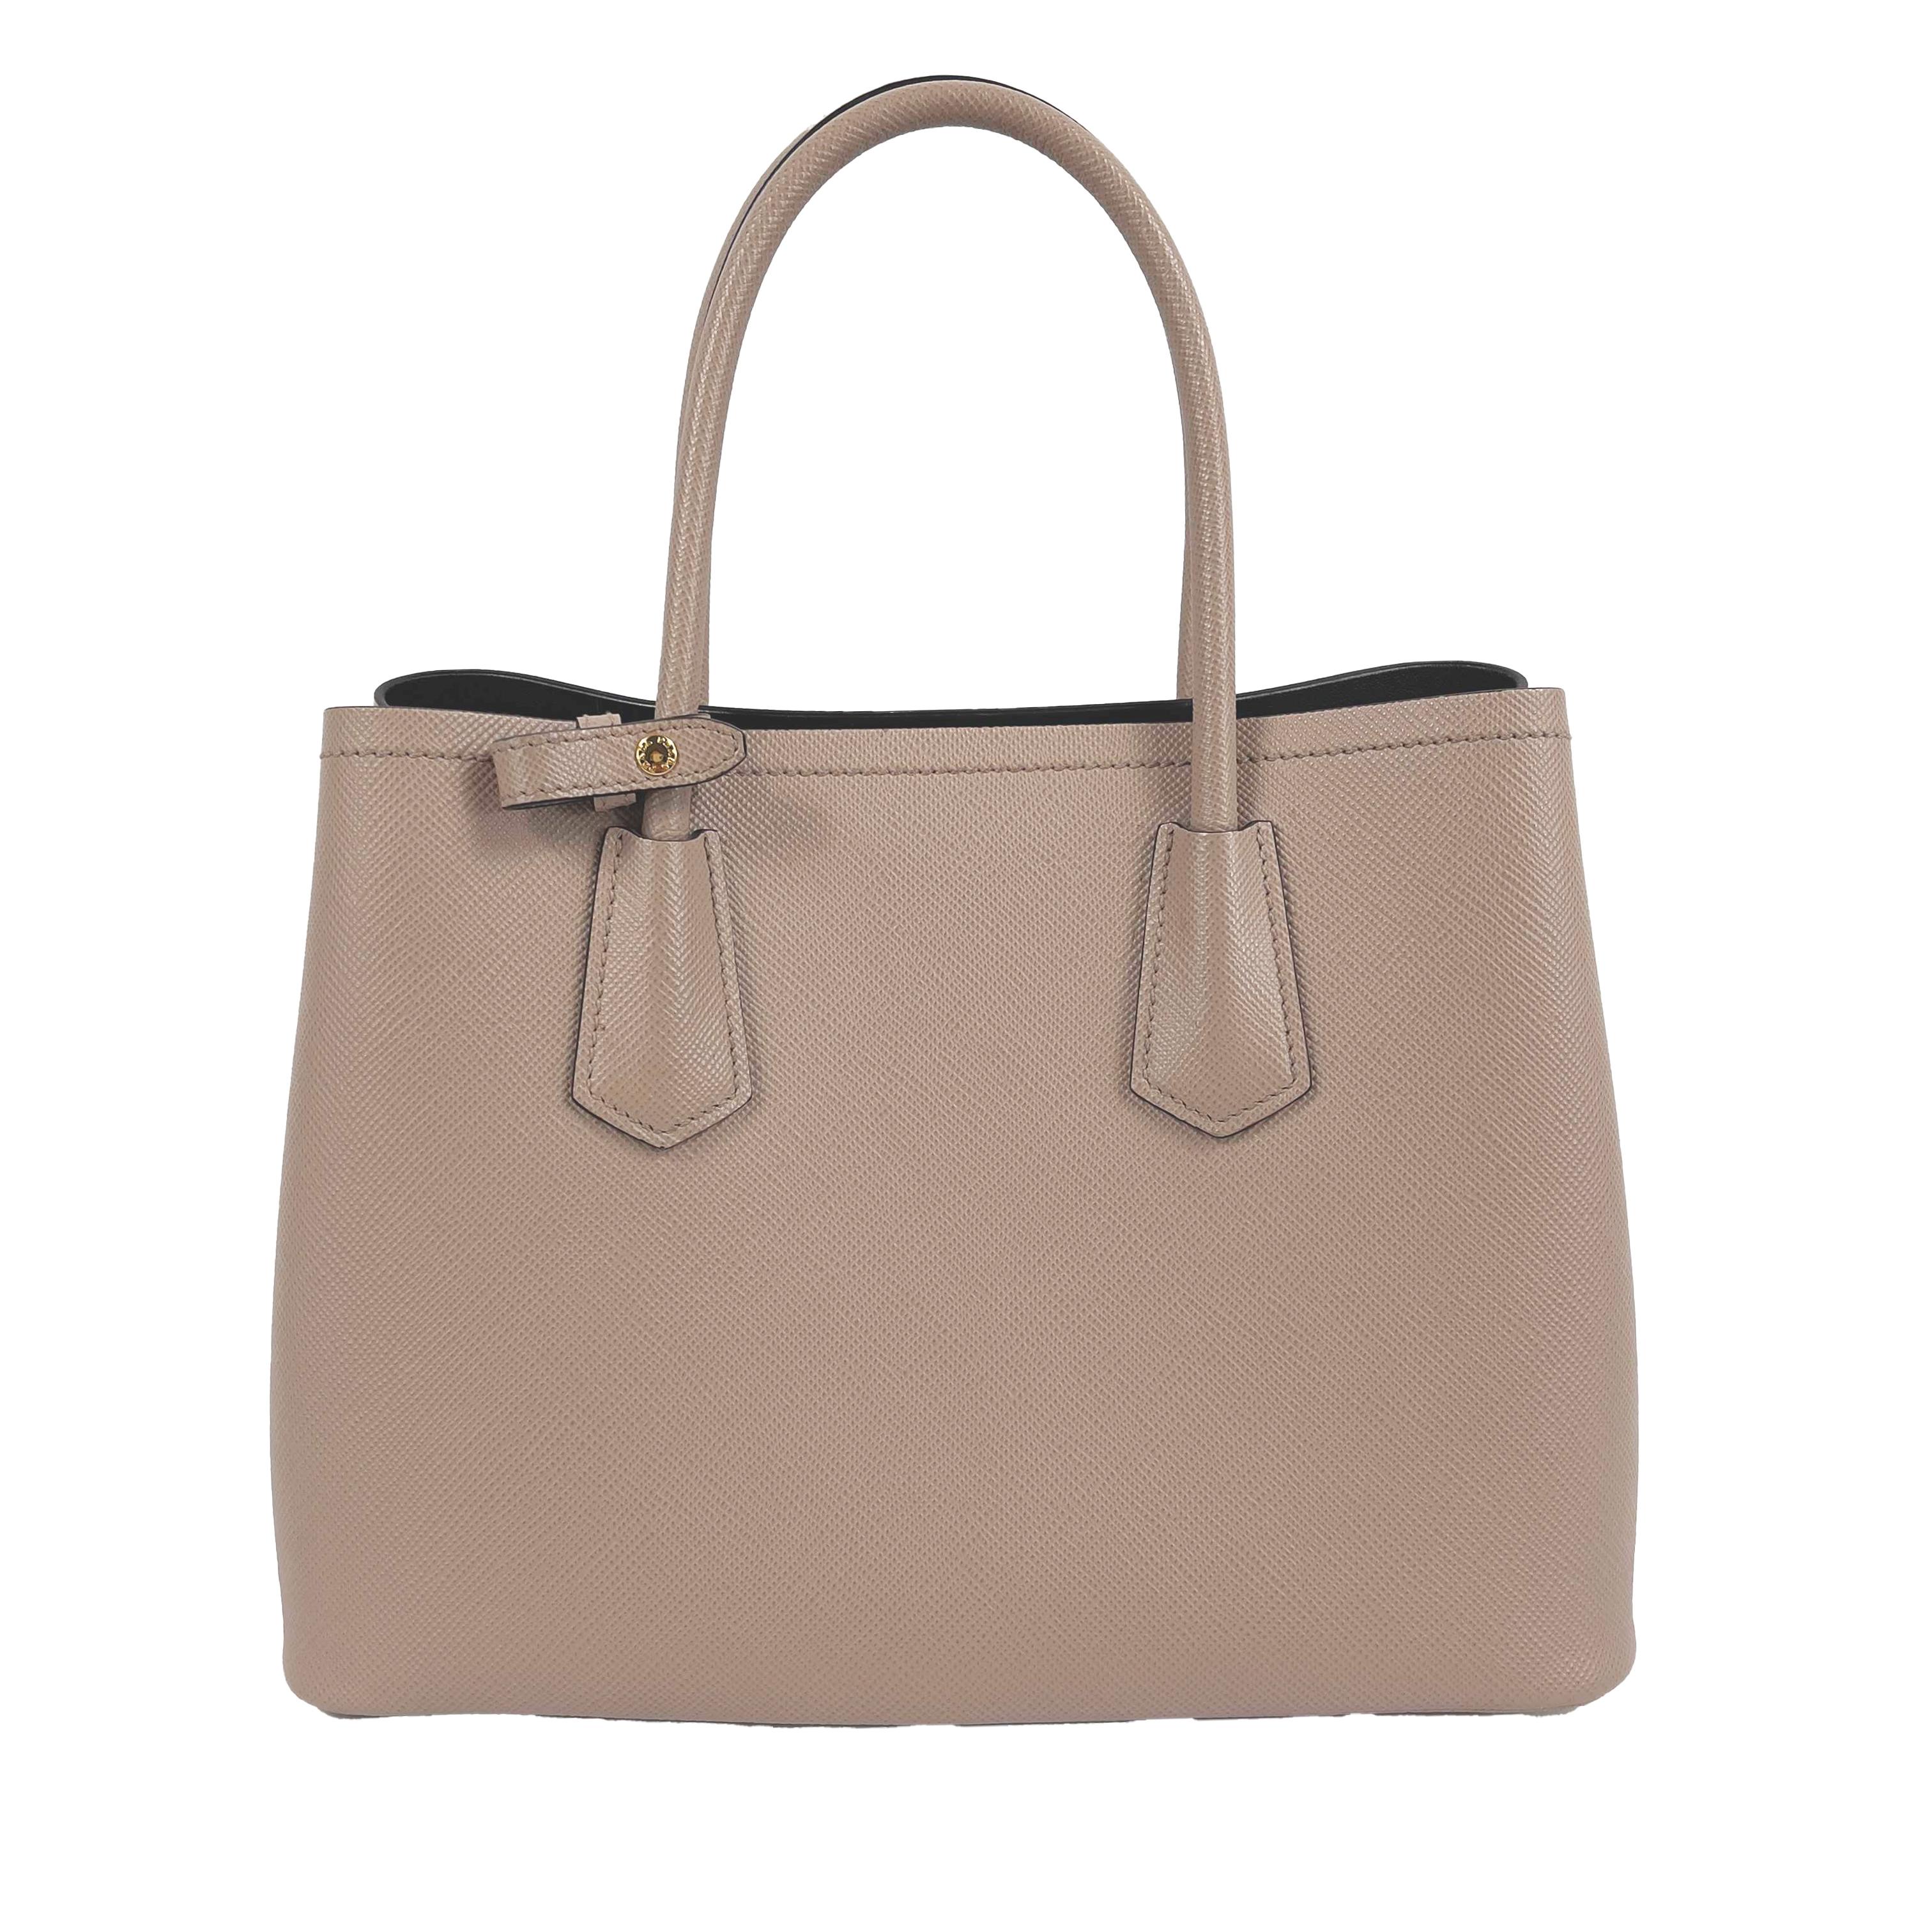 Prada - Small Saffiano Leather Double Bag Tote - Powder Pink / Black w/ Strap

Description

This Prada Double tote is crafted in Saffiano leather. It features a double handle, detachable shoulder strap and nappa leather lining, all accented with